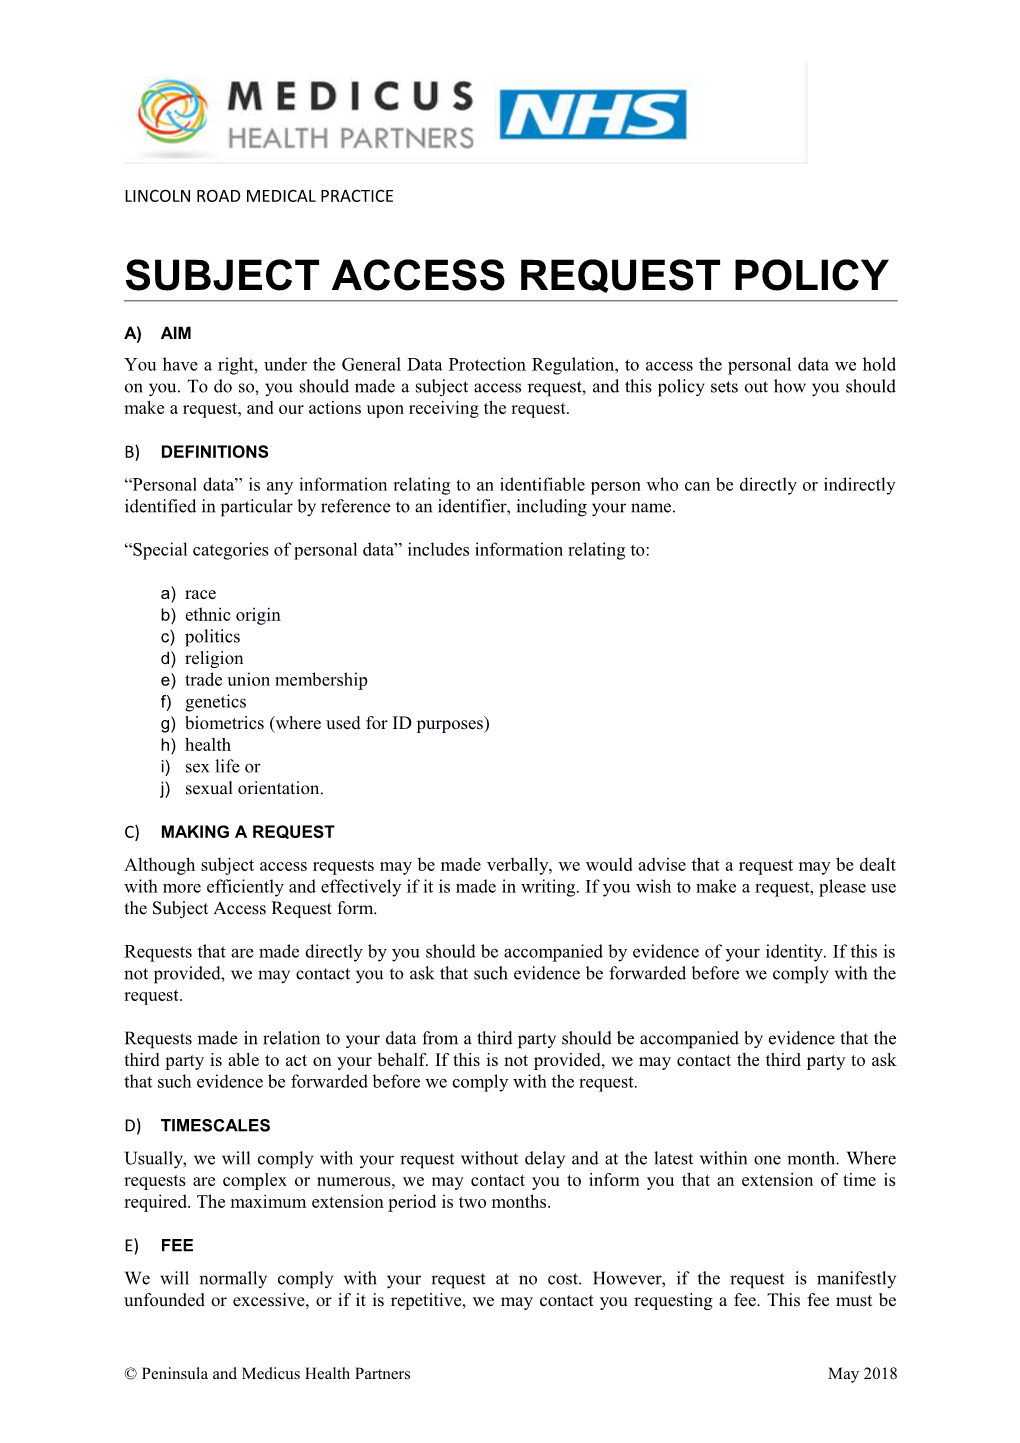 Subject Access Request Policy